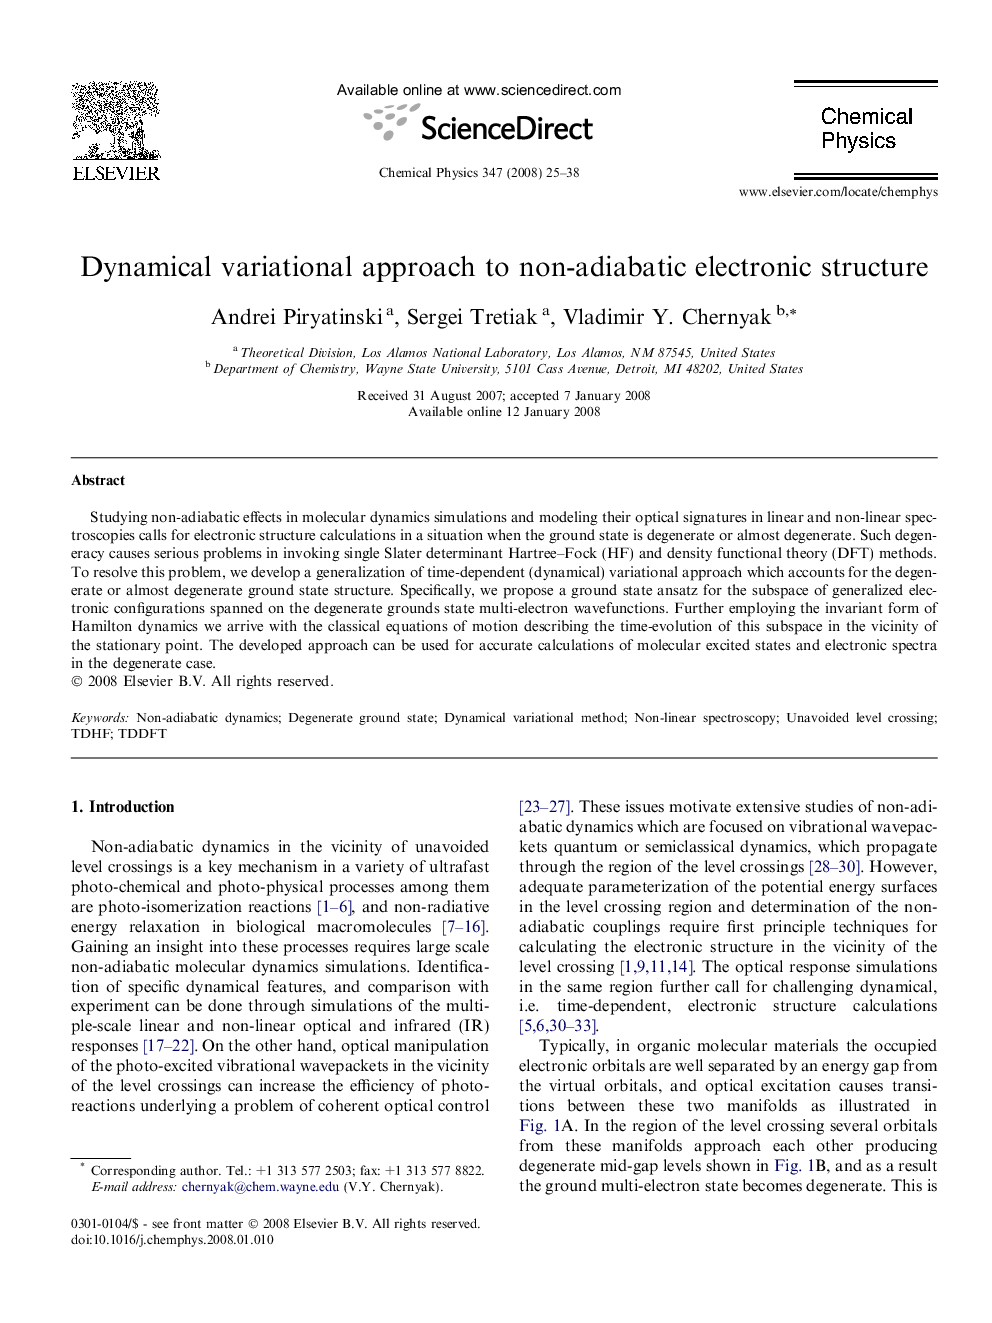 Dynamical variational approach to non-adiabatic electronic structure